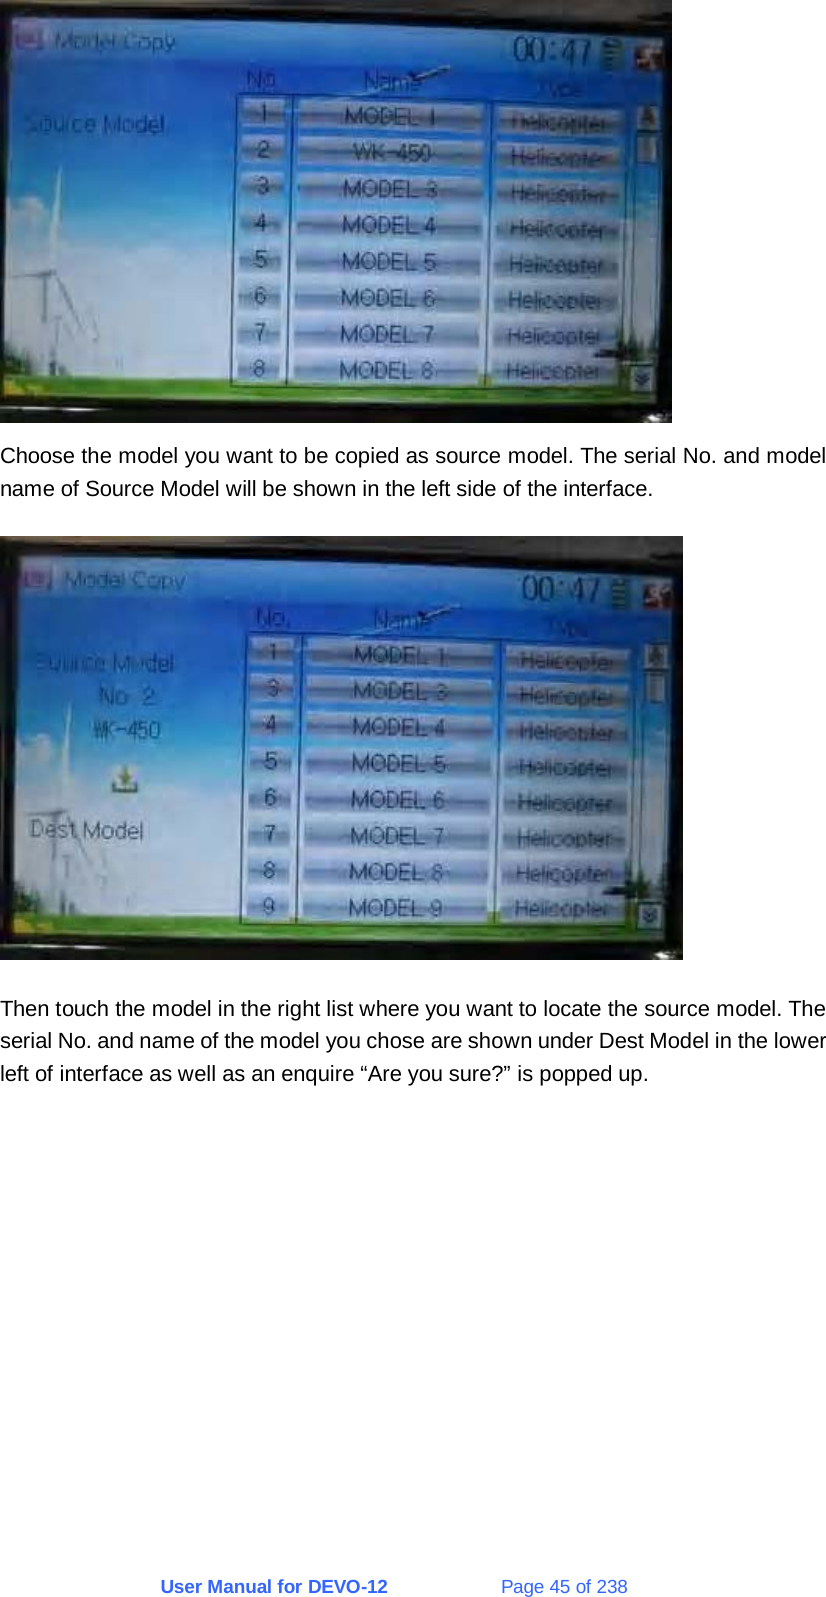 User Manual for DEVO-12             Page 45 of 238  Choose the model you want to be copied as source model. The serial No. and model name of Source Model will be shown in the left side of the interface.  Then touch the model in the right list where you want to locate the source model. The serial No. and name of the model you chose are shown under Dest Model in the lower left of interface as well as an enquire “Are you sure?” is popped up.  